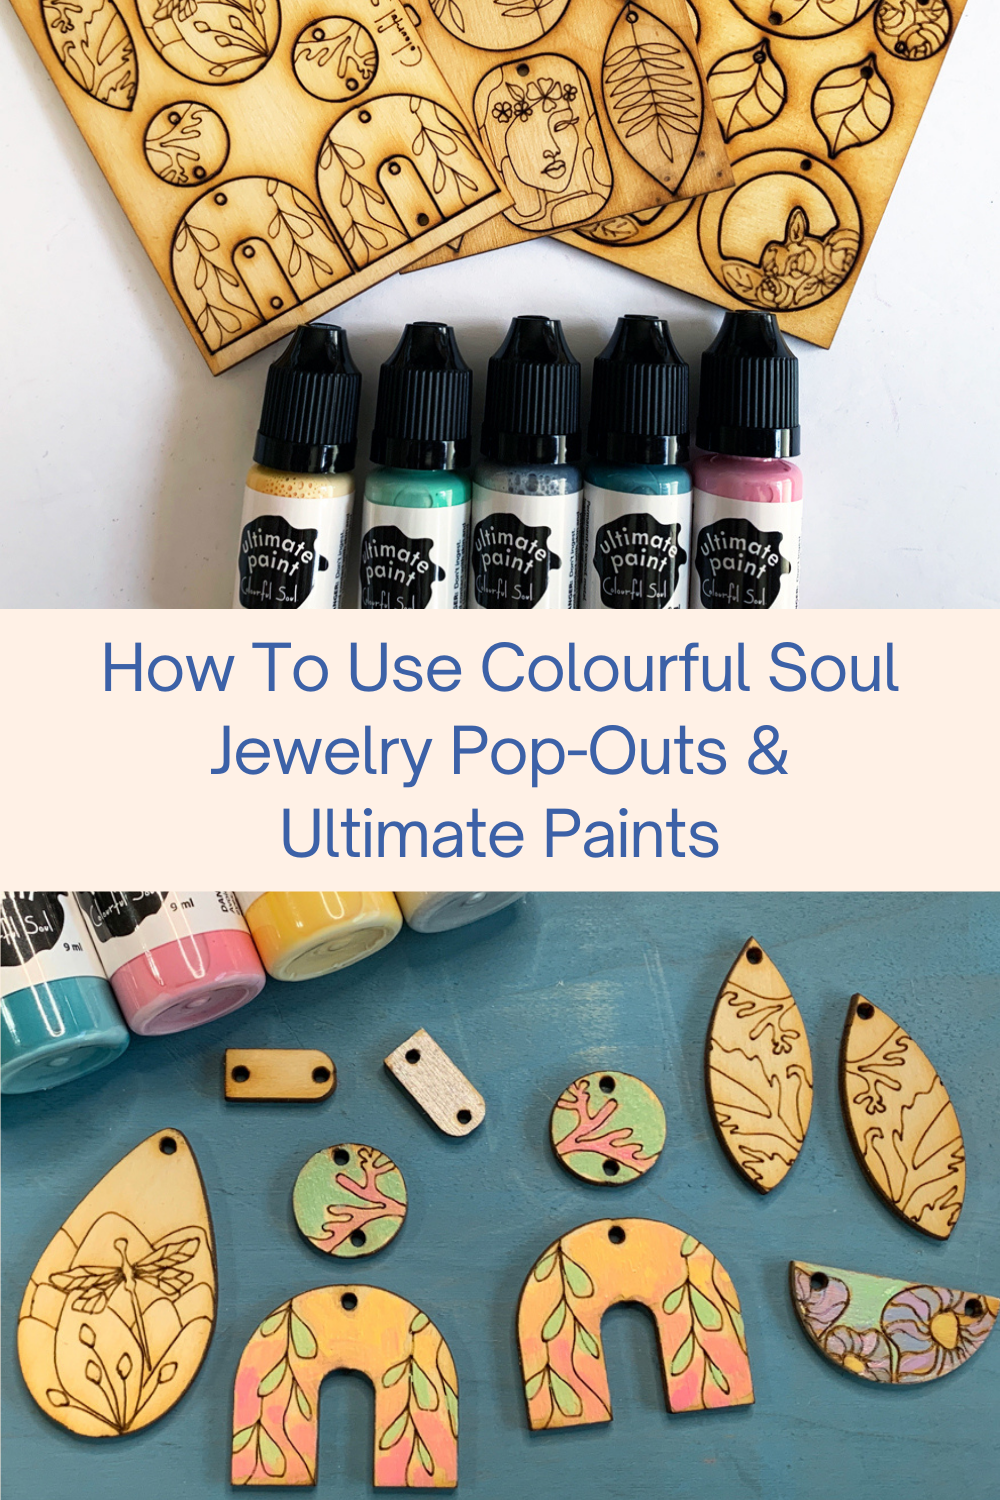 How To Use Colourful Soul Jewelry Pop-Outs & Ultimate Paints Collage